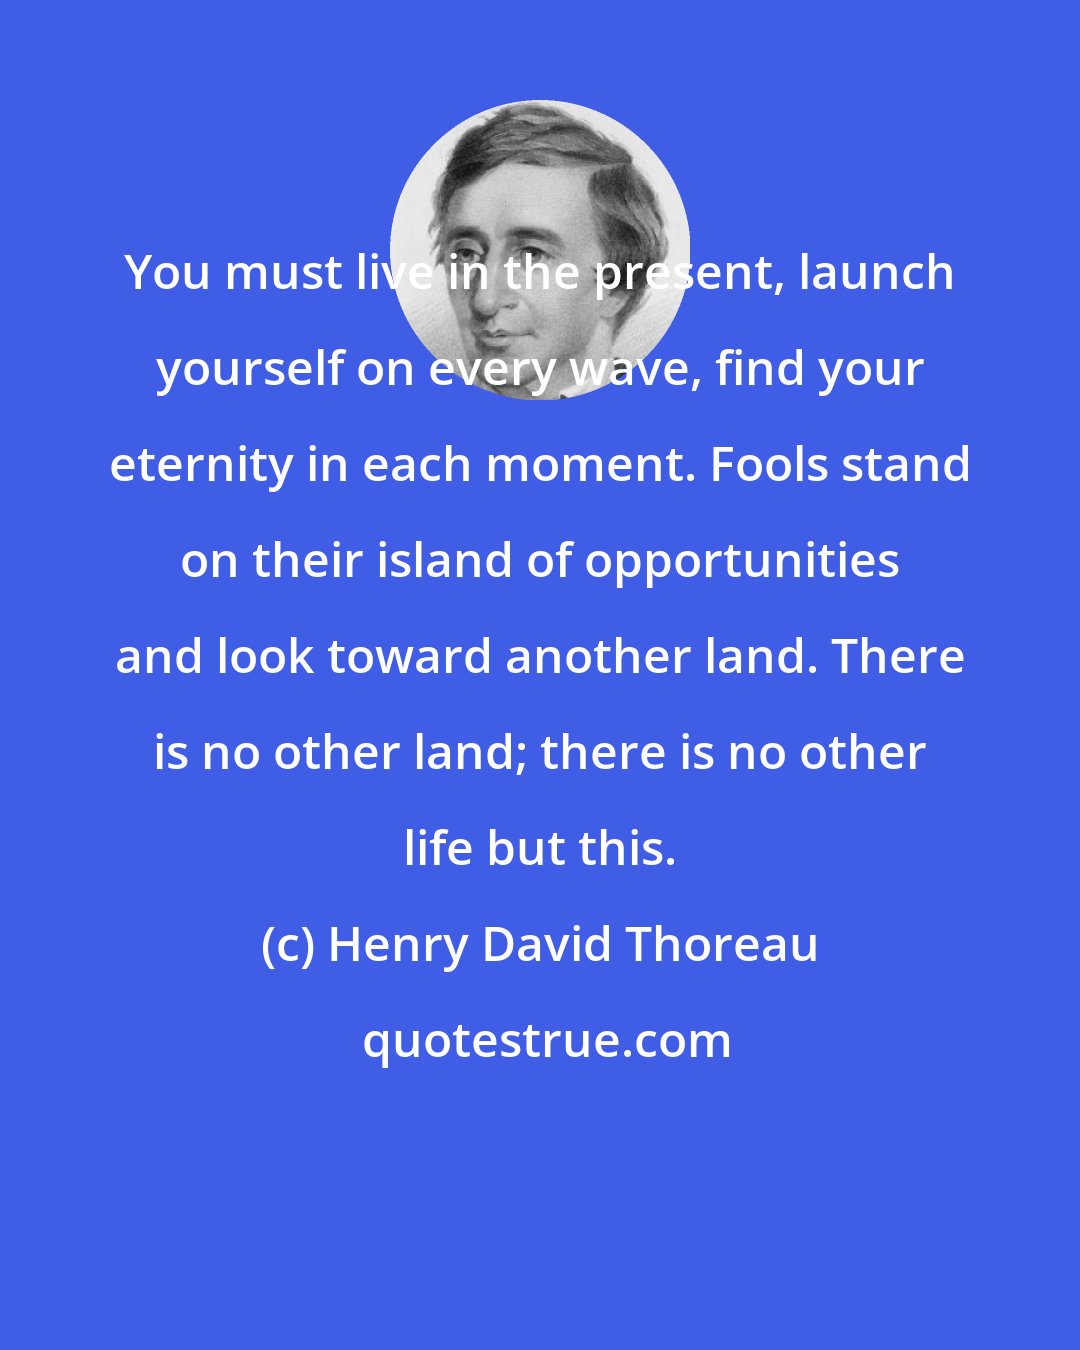 Henry David Thoreau: You must live in the present, launch yourself on every wave, find your eternity in each moment. Fools stand on their island of opportunities and look toward another land. There is no other land; there is no other life but this.